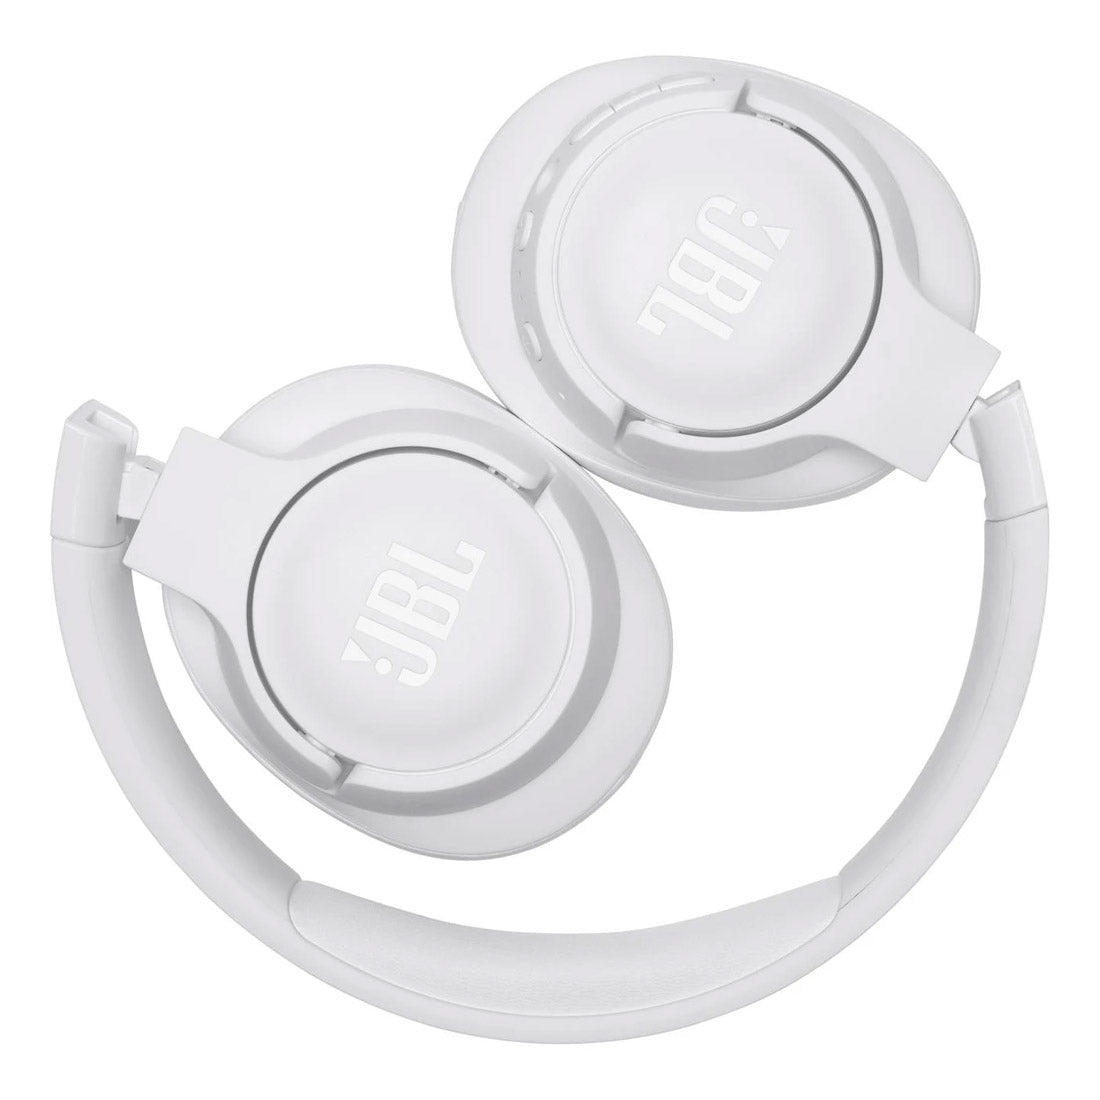 JBL Tune 760 NC - Lightweight, Foldable Over-Ear Wireless Headphones with Active Noise Cancellation - White